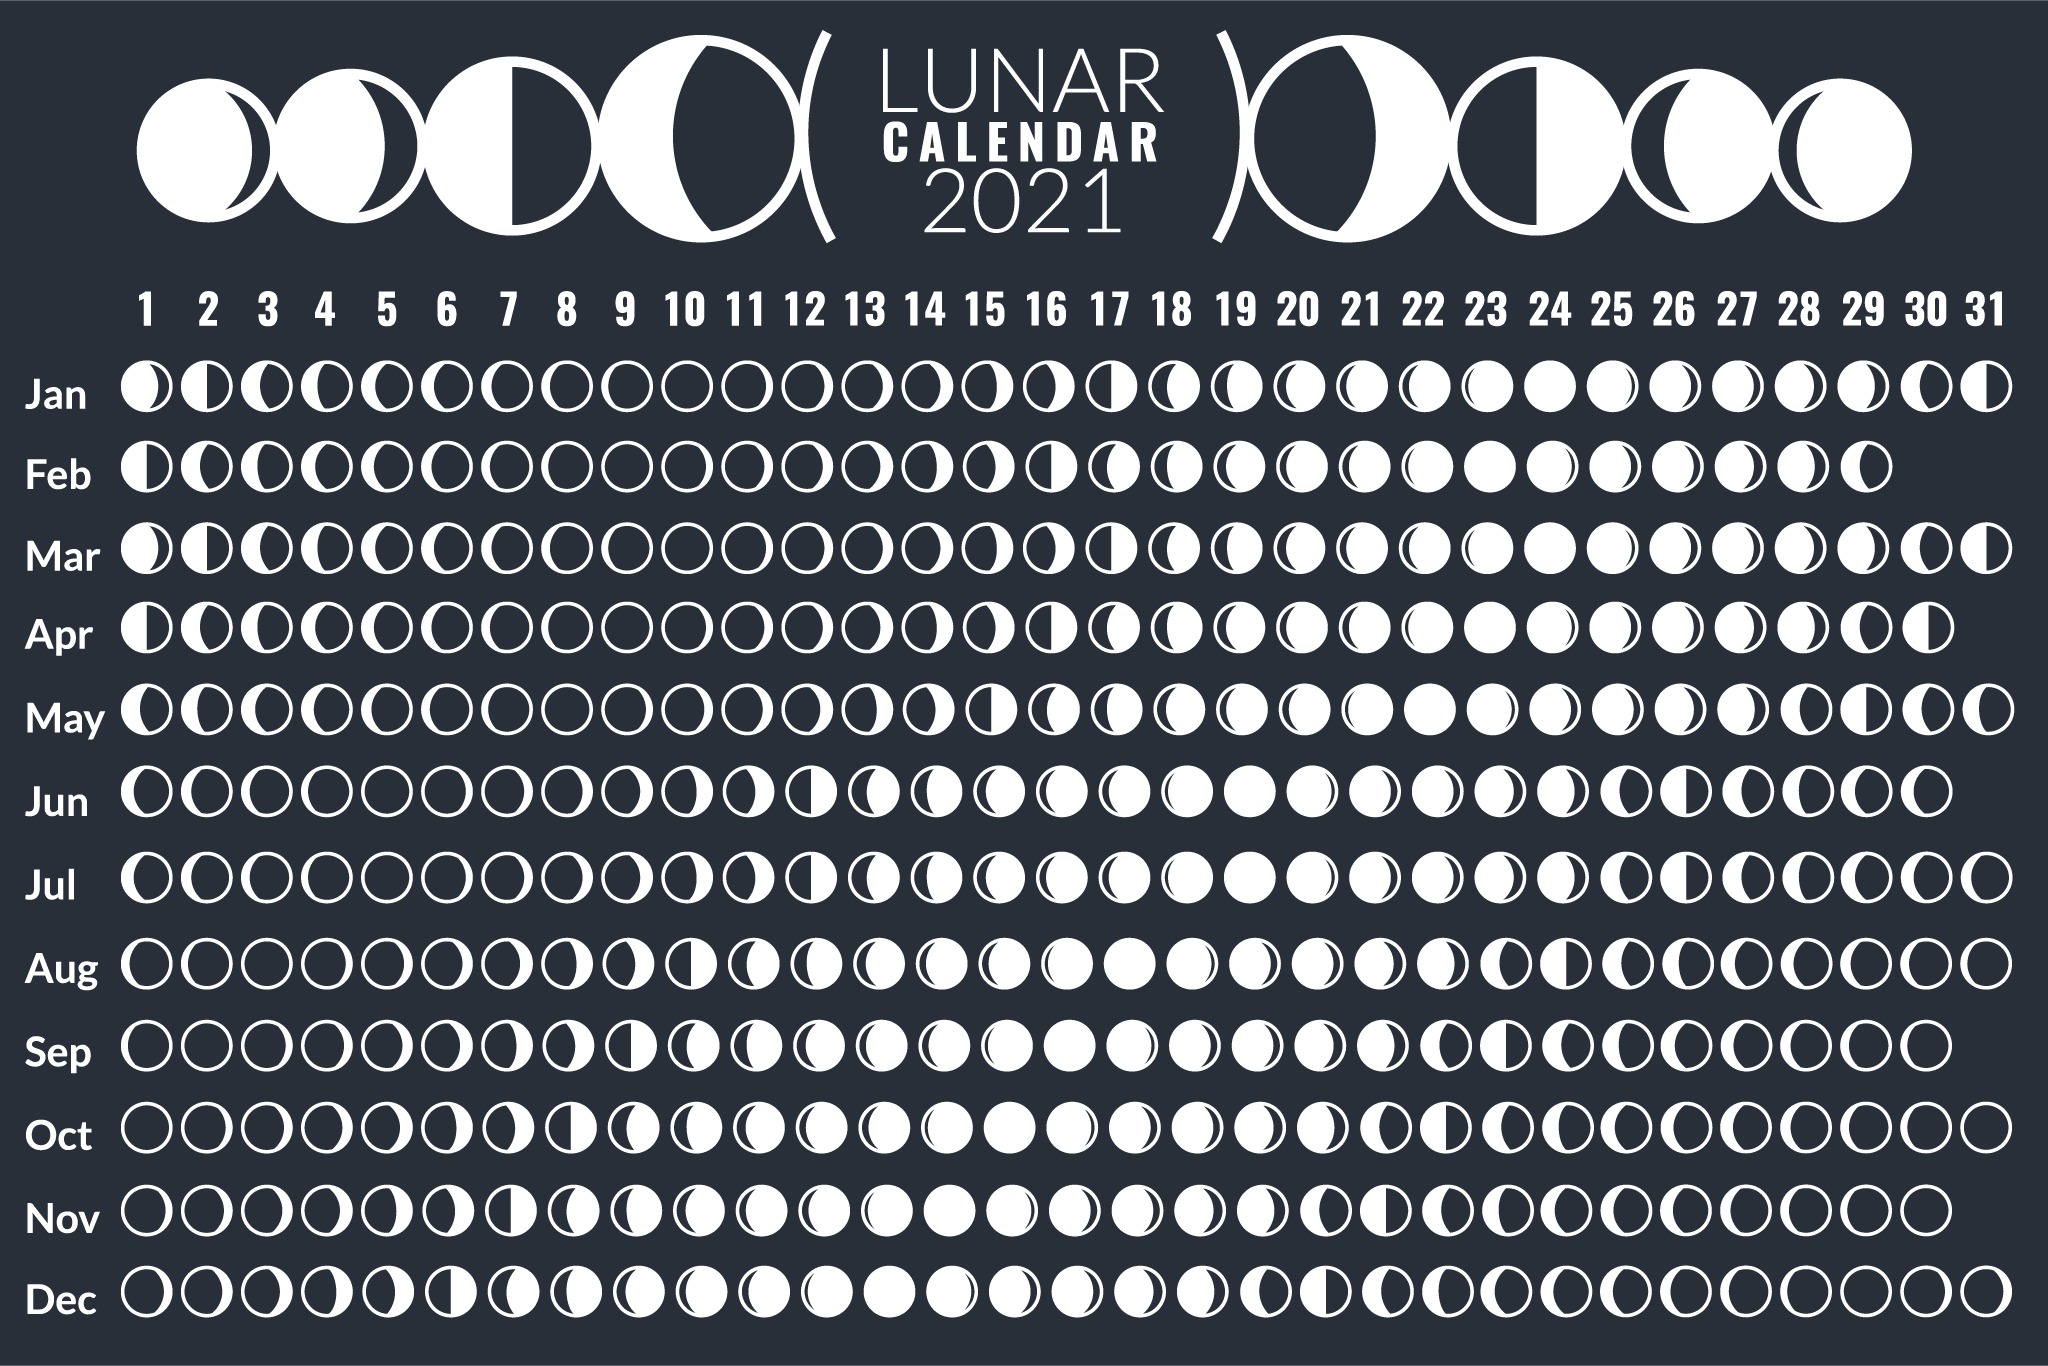 What Causes Moon Phases? (+ All 8 Moon Phases Explained)